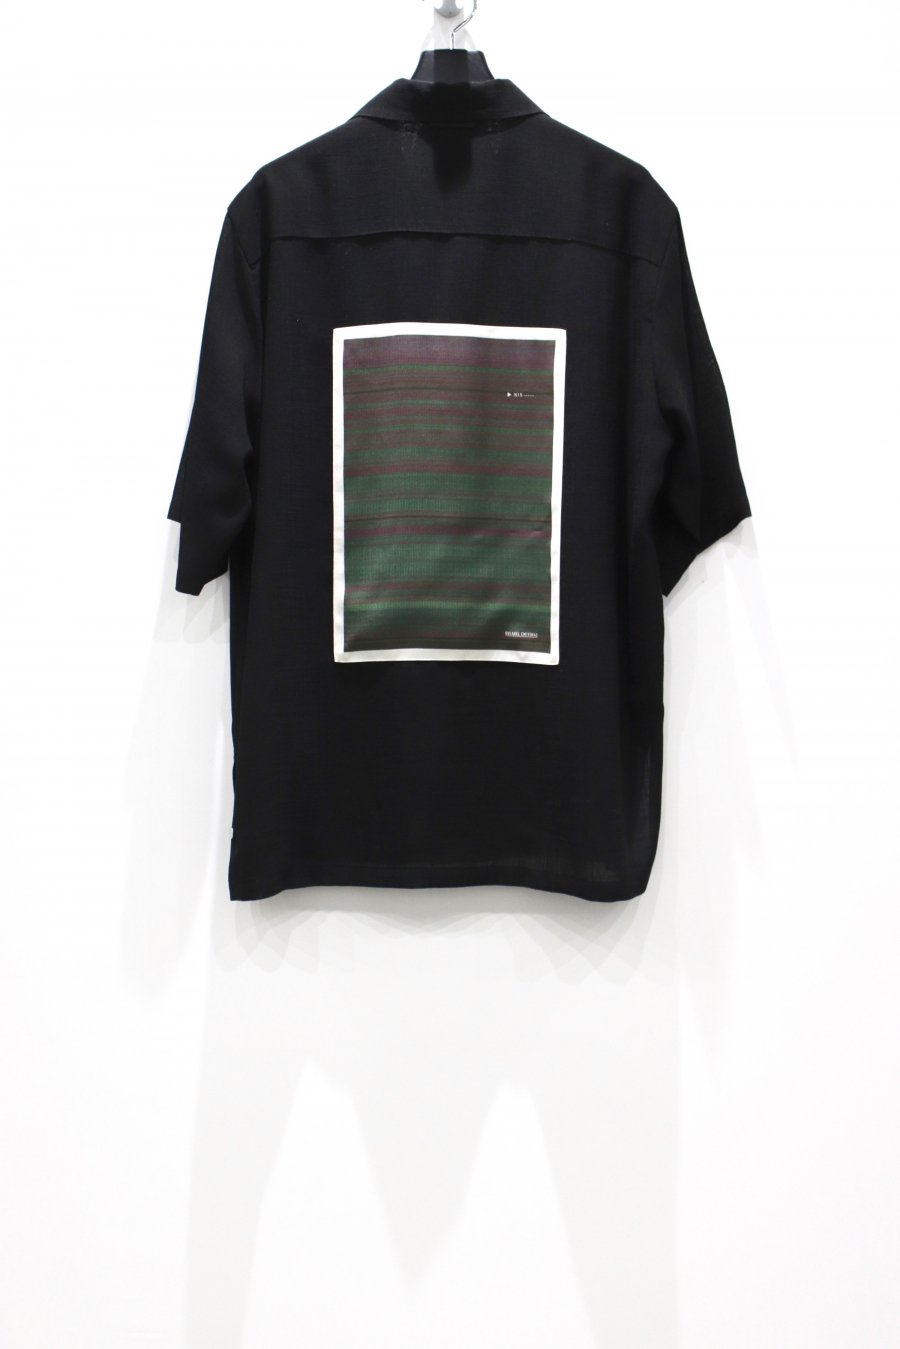 NULABEL  OPEN COLLAR SHT S/S(BLACK)<img class='new_mark_img2' src='https://img.shop-pro.jp/img/new/icons15.gif' style='border:none;display:inline;margin:0px;padding:0px;width:auto;' />